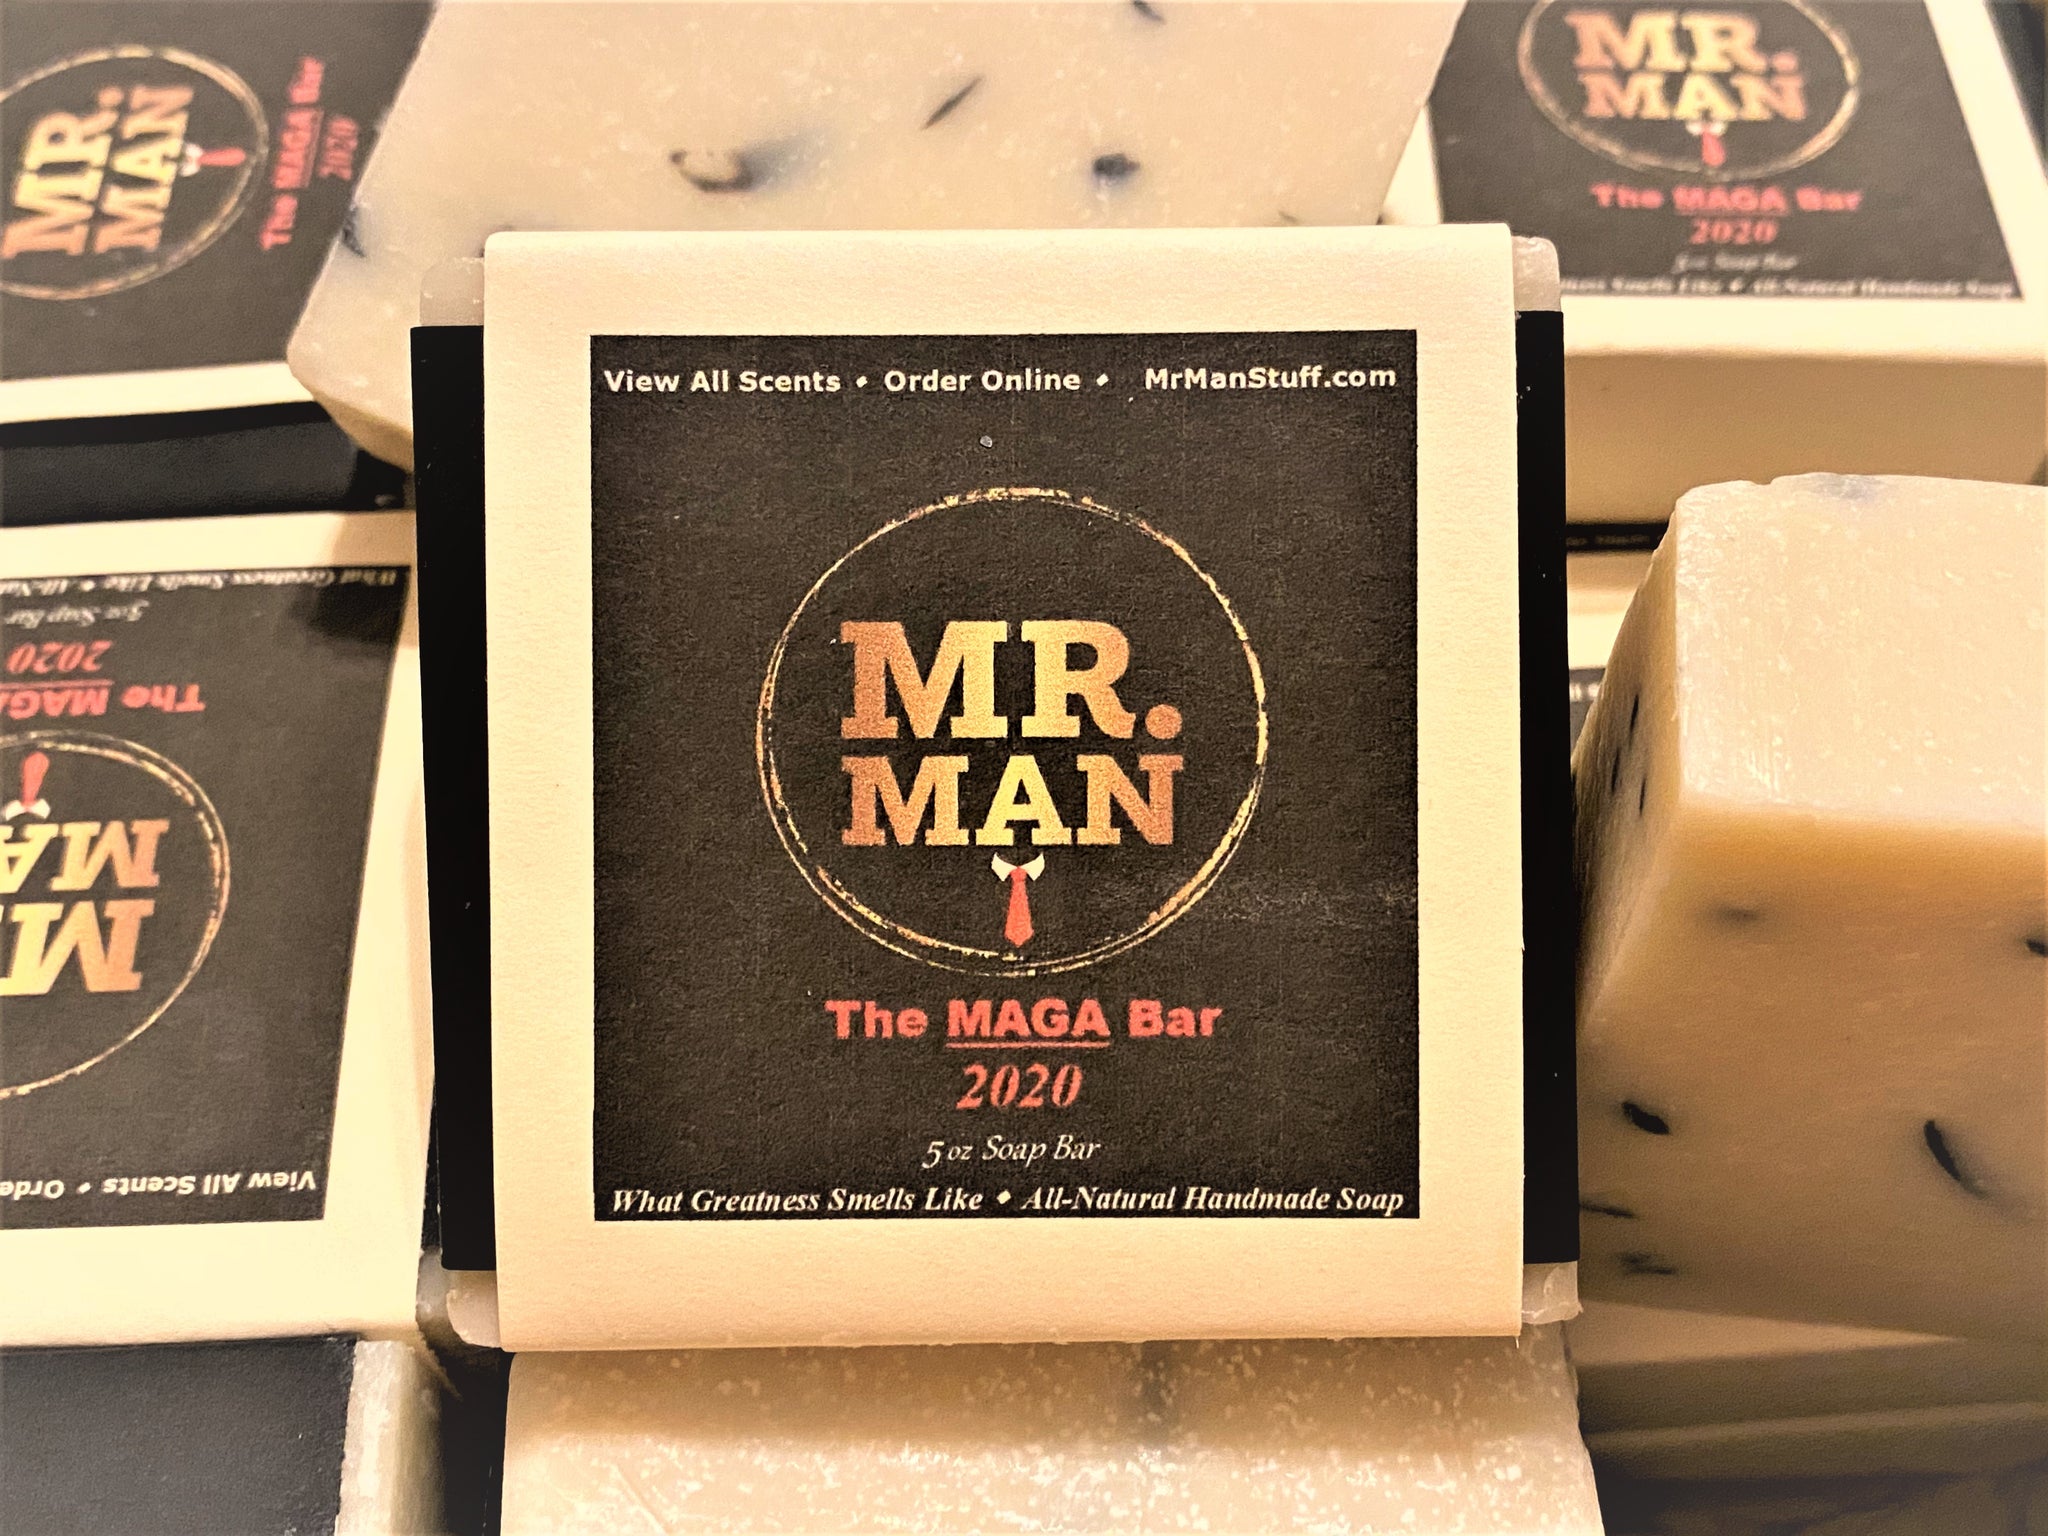 Manzrala All-in-One Bar Soap for Men